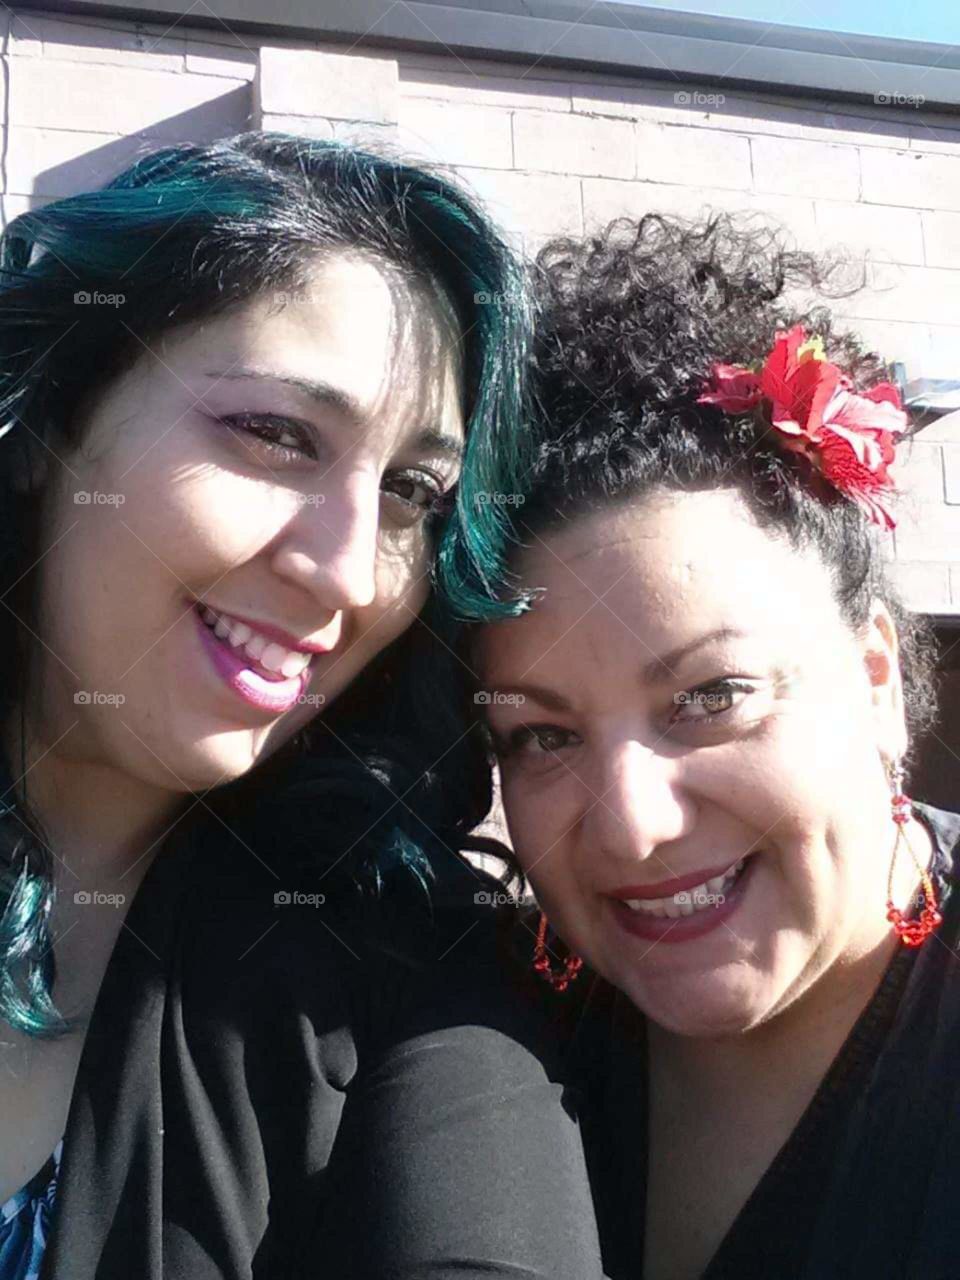 Me with my hair dresser after she dyed my hair this stunning Teal color, still the best $200 I've ever spent on my hair, well and the most I've ever spent lol.